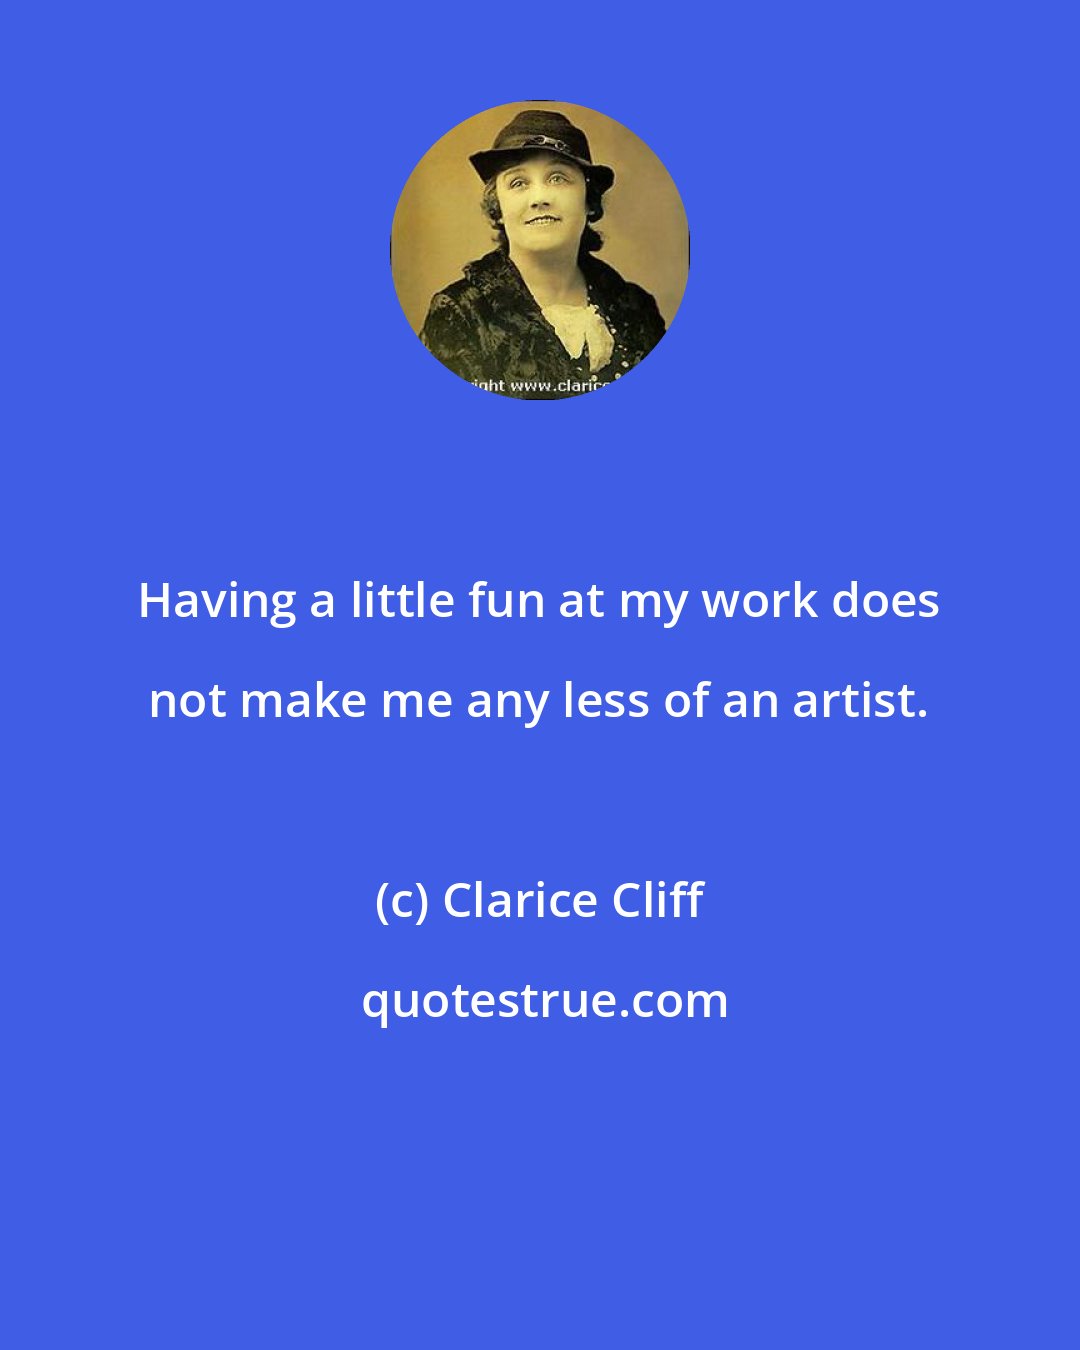 Clarice Cliff: Having a little fun at my work does not make me any less of an artist.